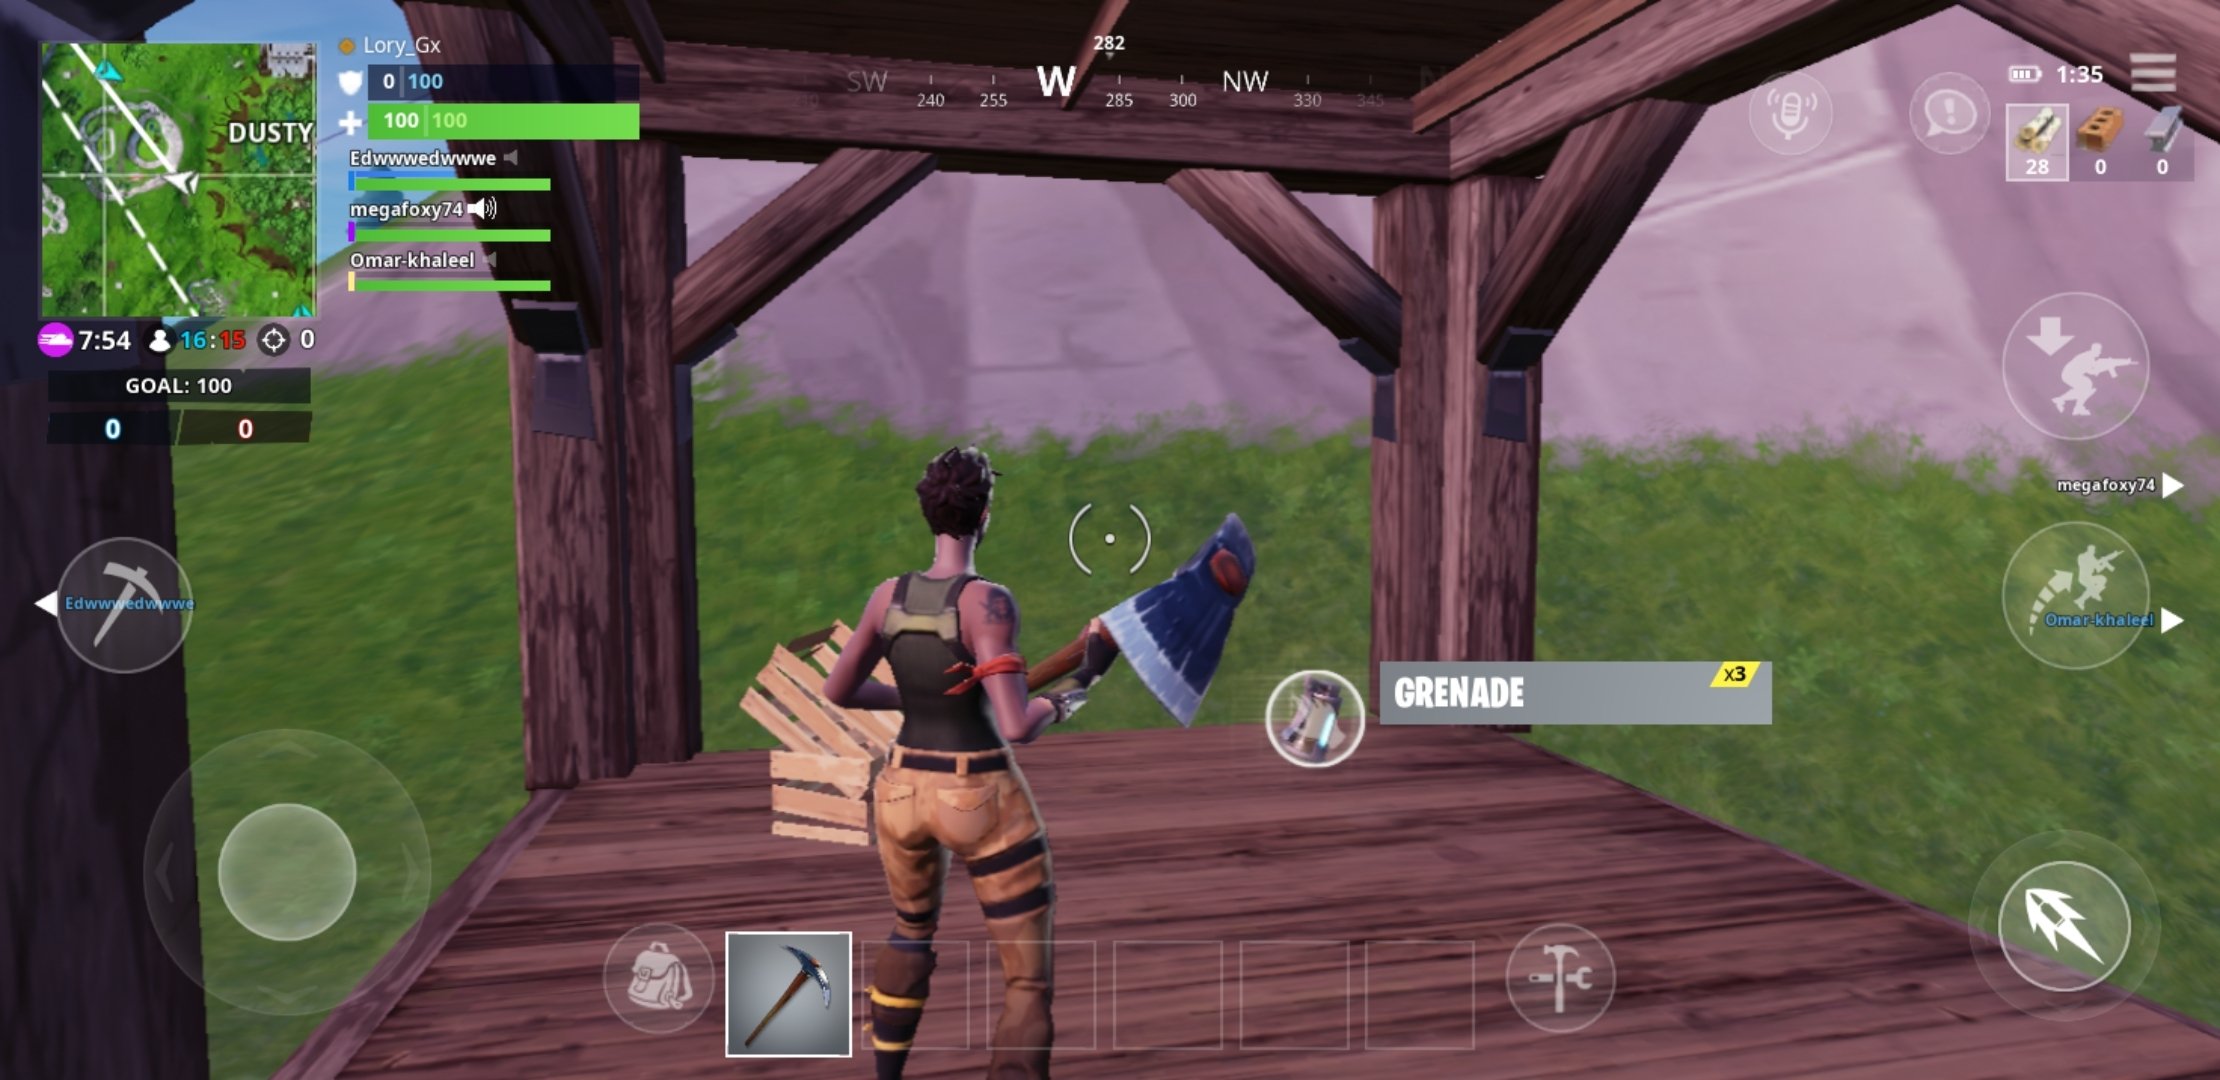 Fortnite APK (Android Game) - Free Download